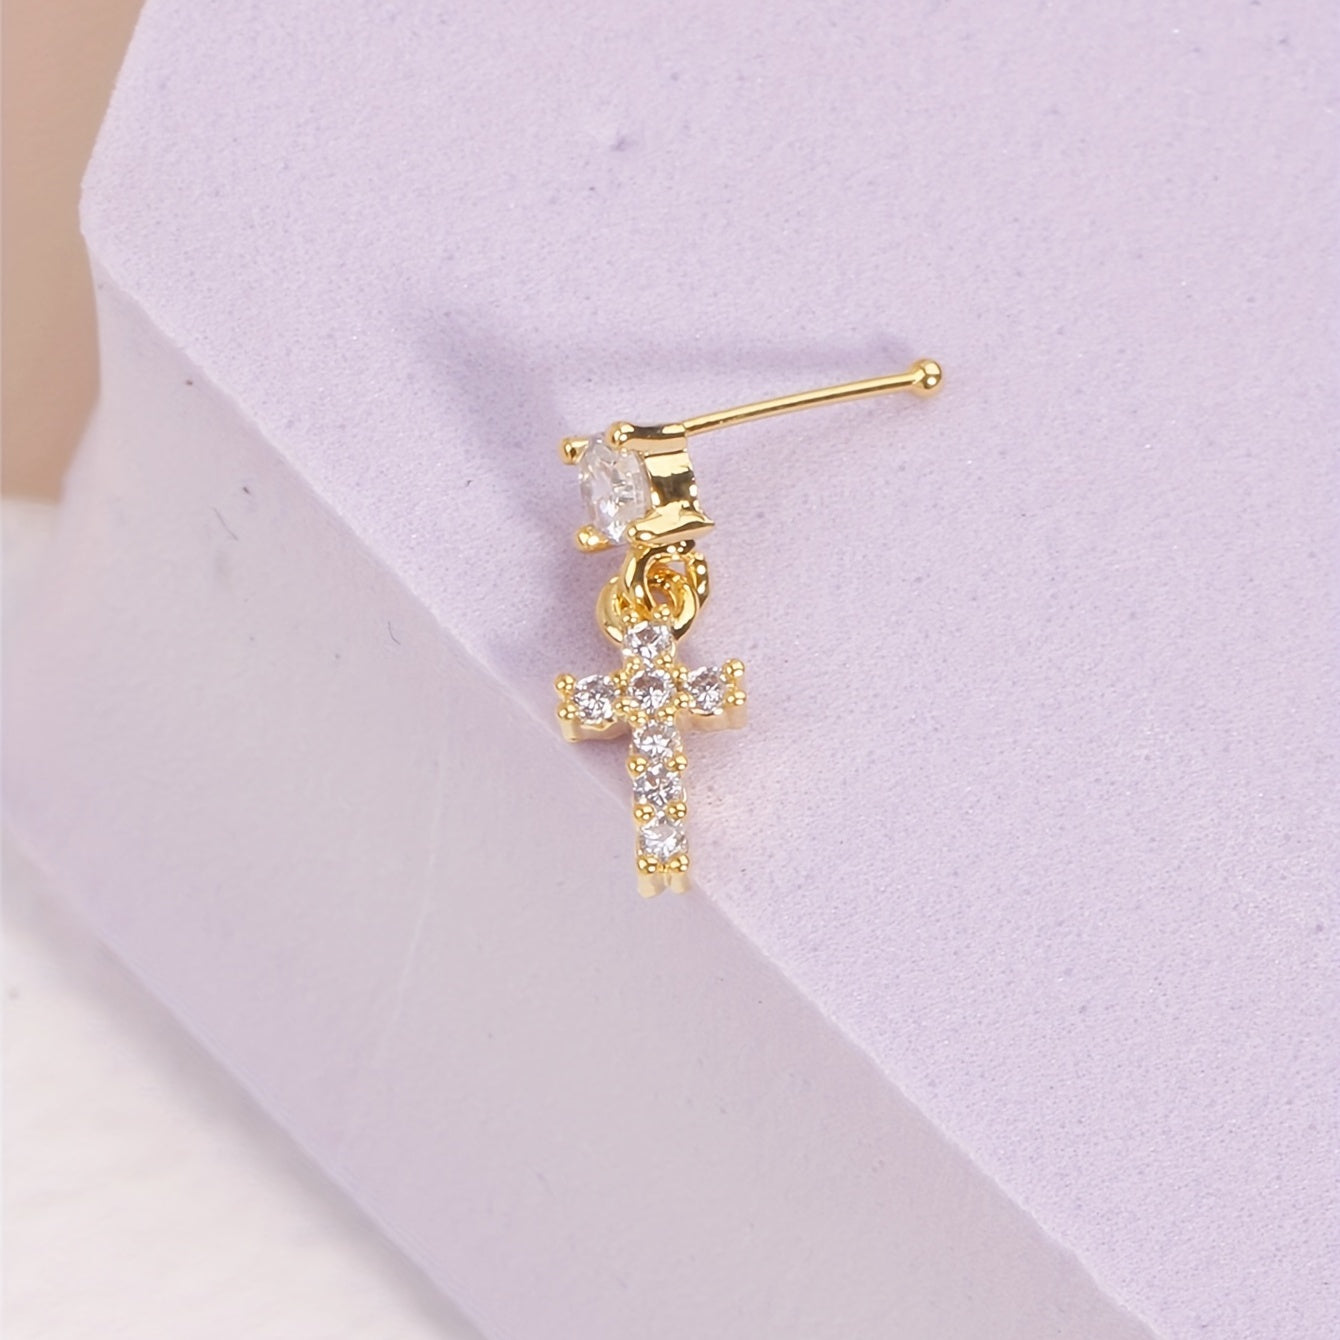 Add a Touch of Glamour with our Cross Dangle Nose Ring for Women - Inlaid with Shiny Zircon Piercing Jewelry